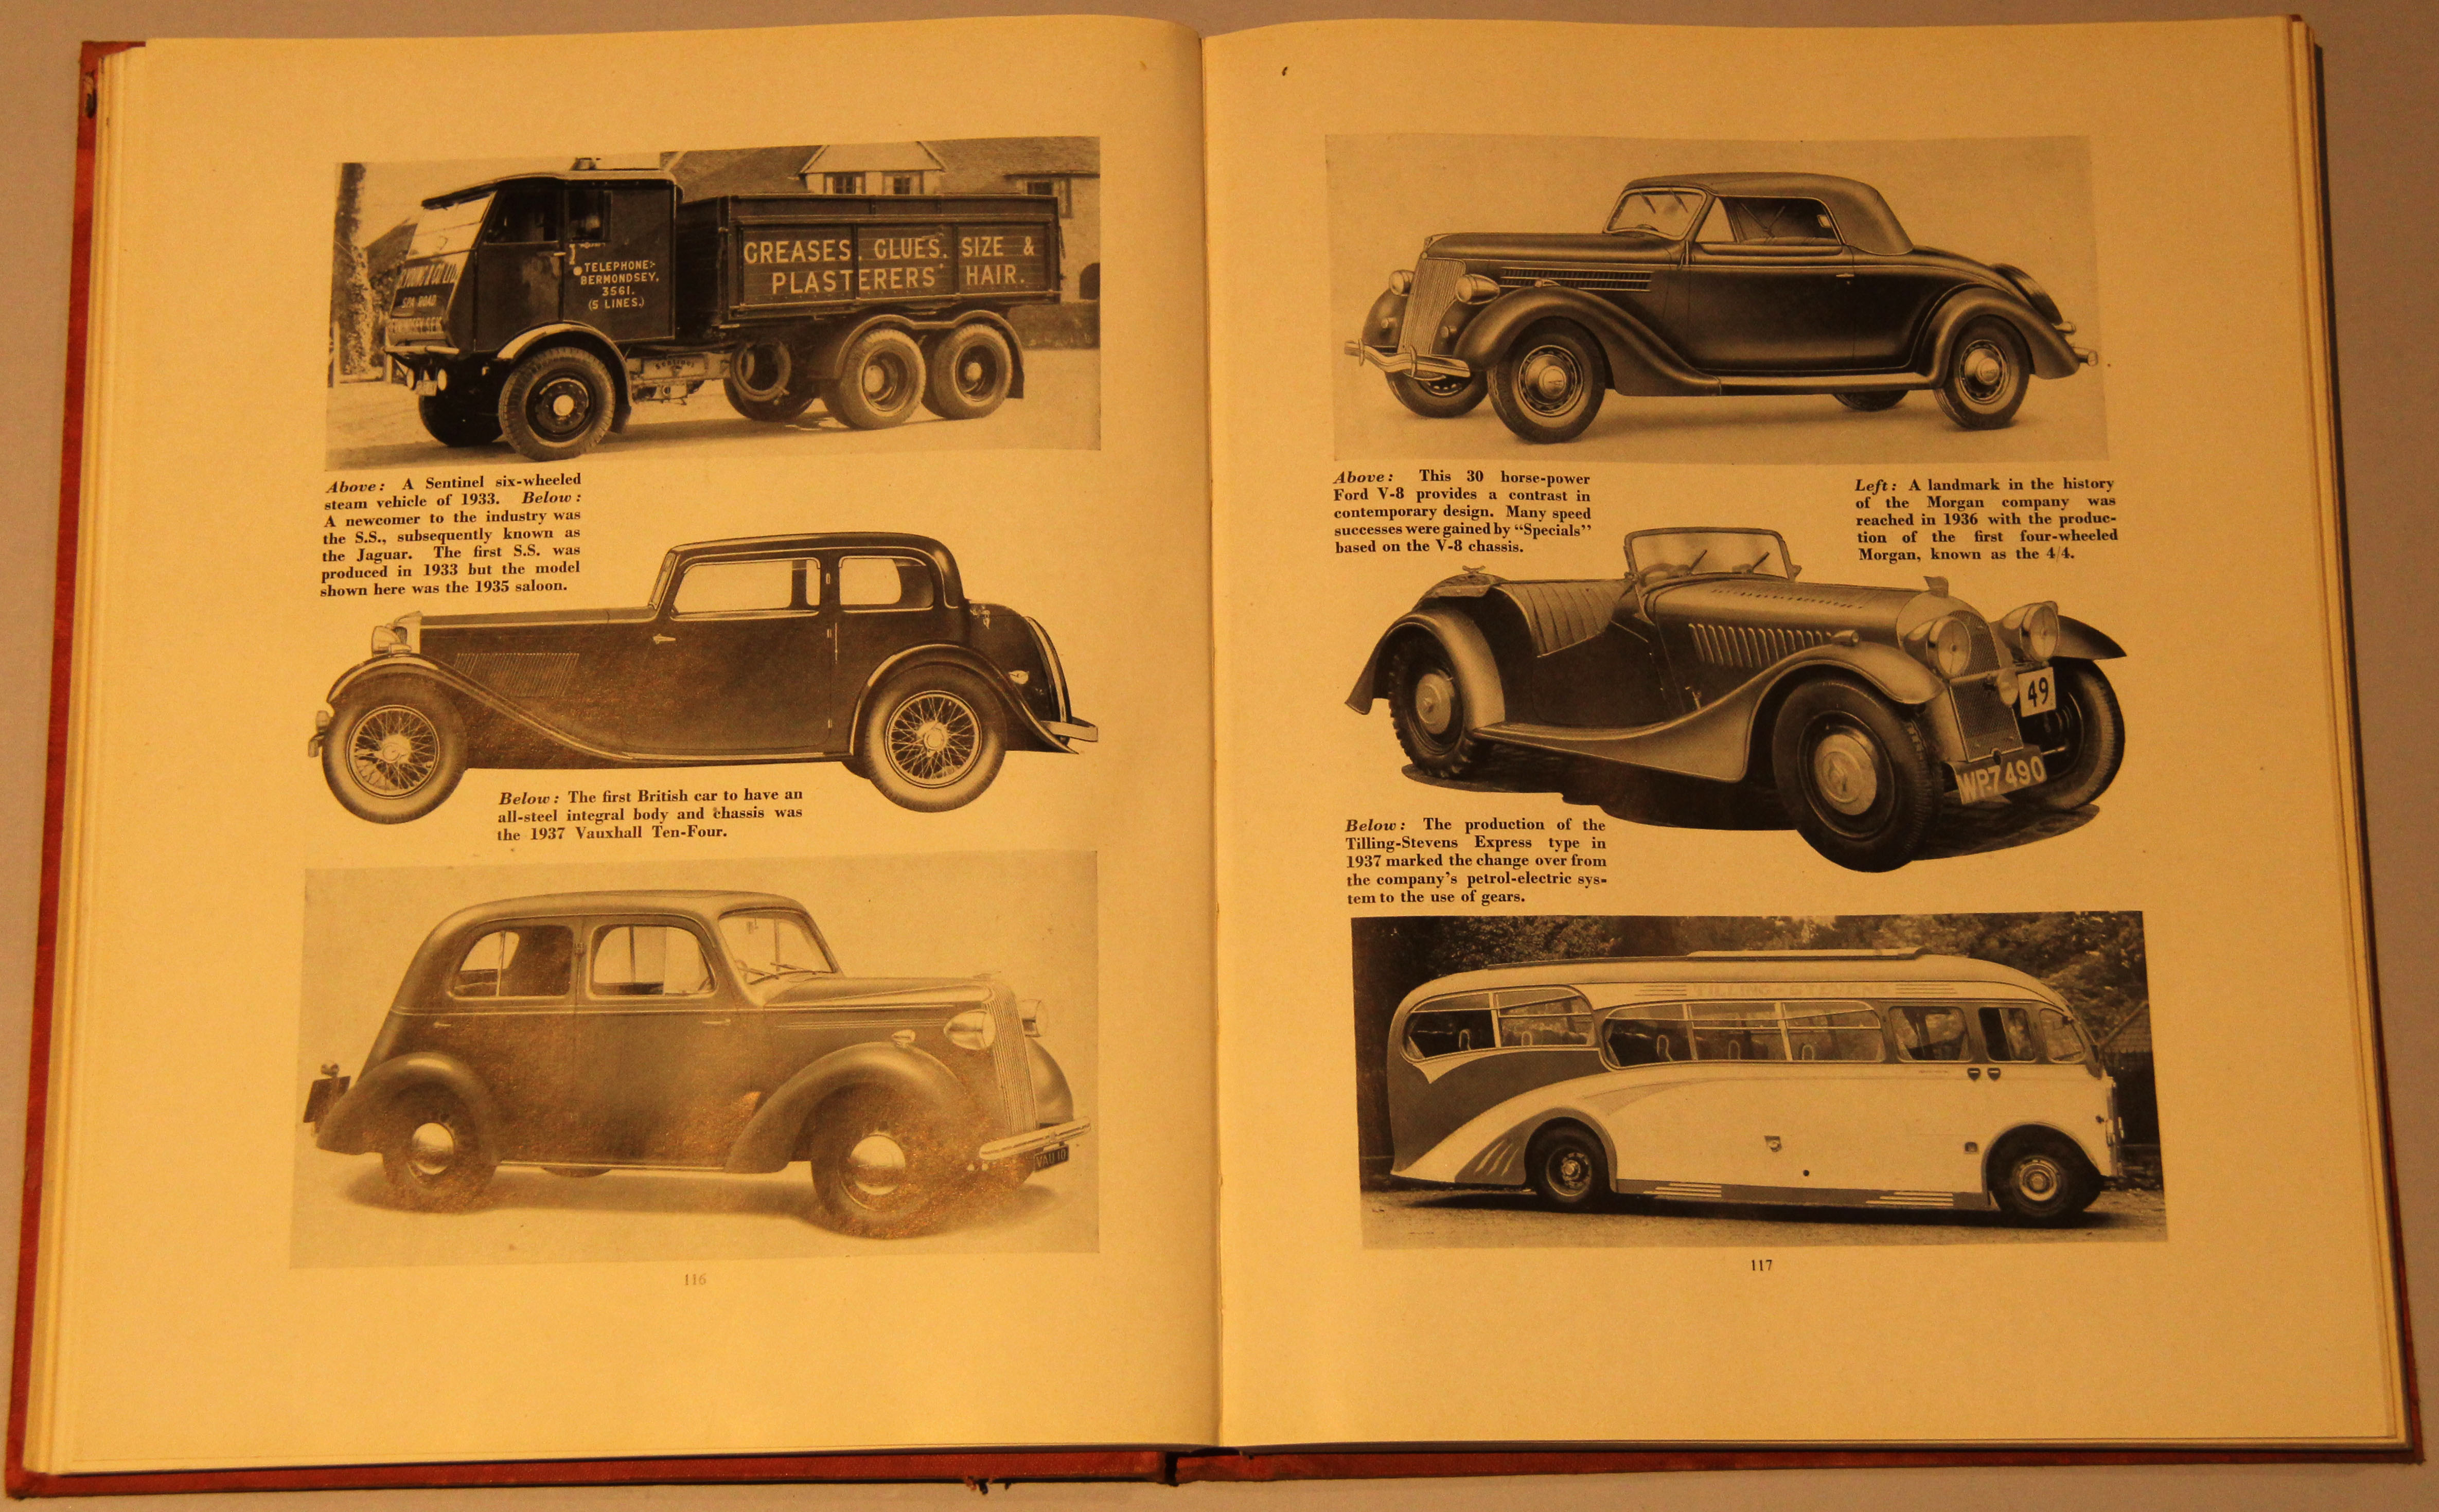 Britain’s Motor Industry by H. G. - Image 10 of 10